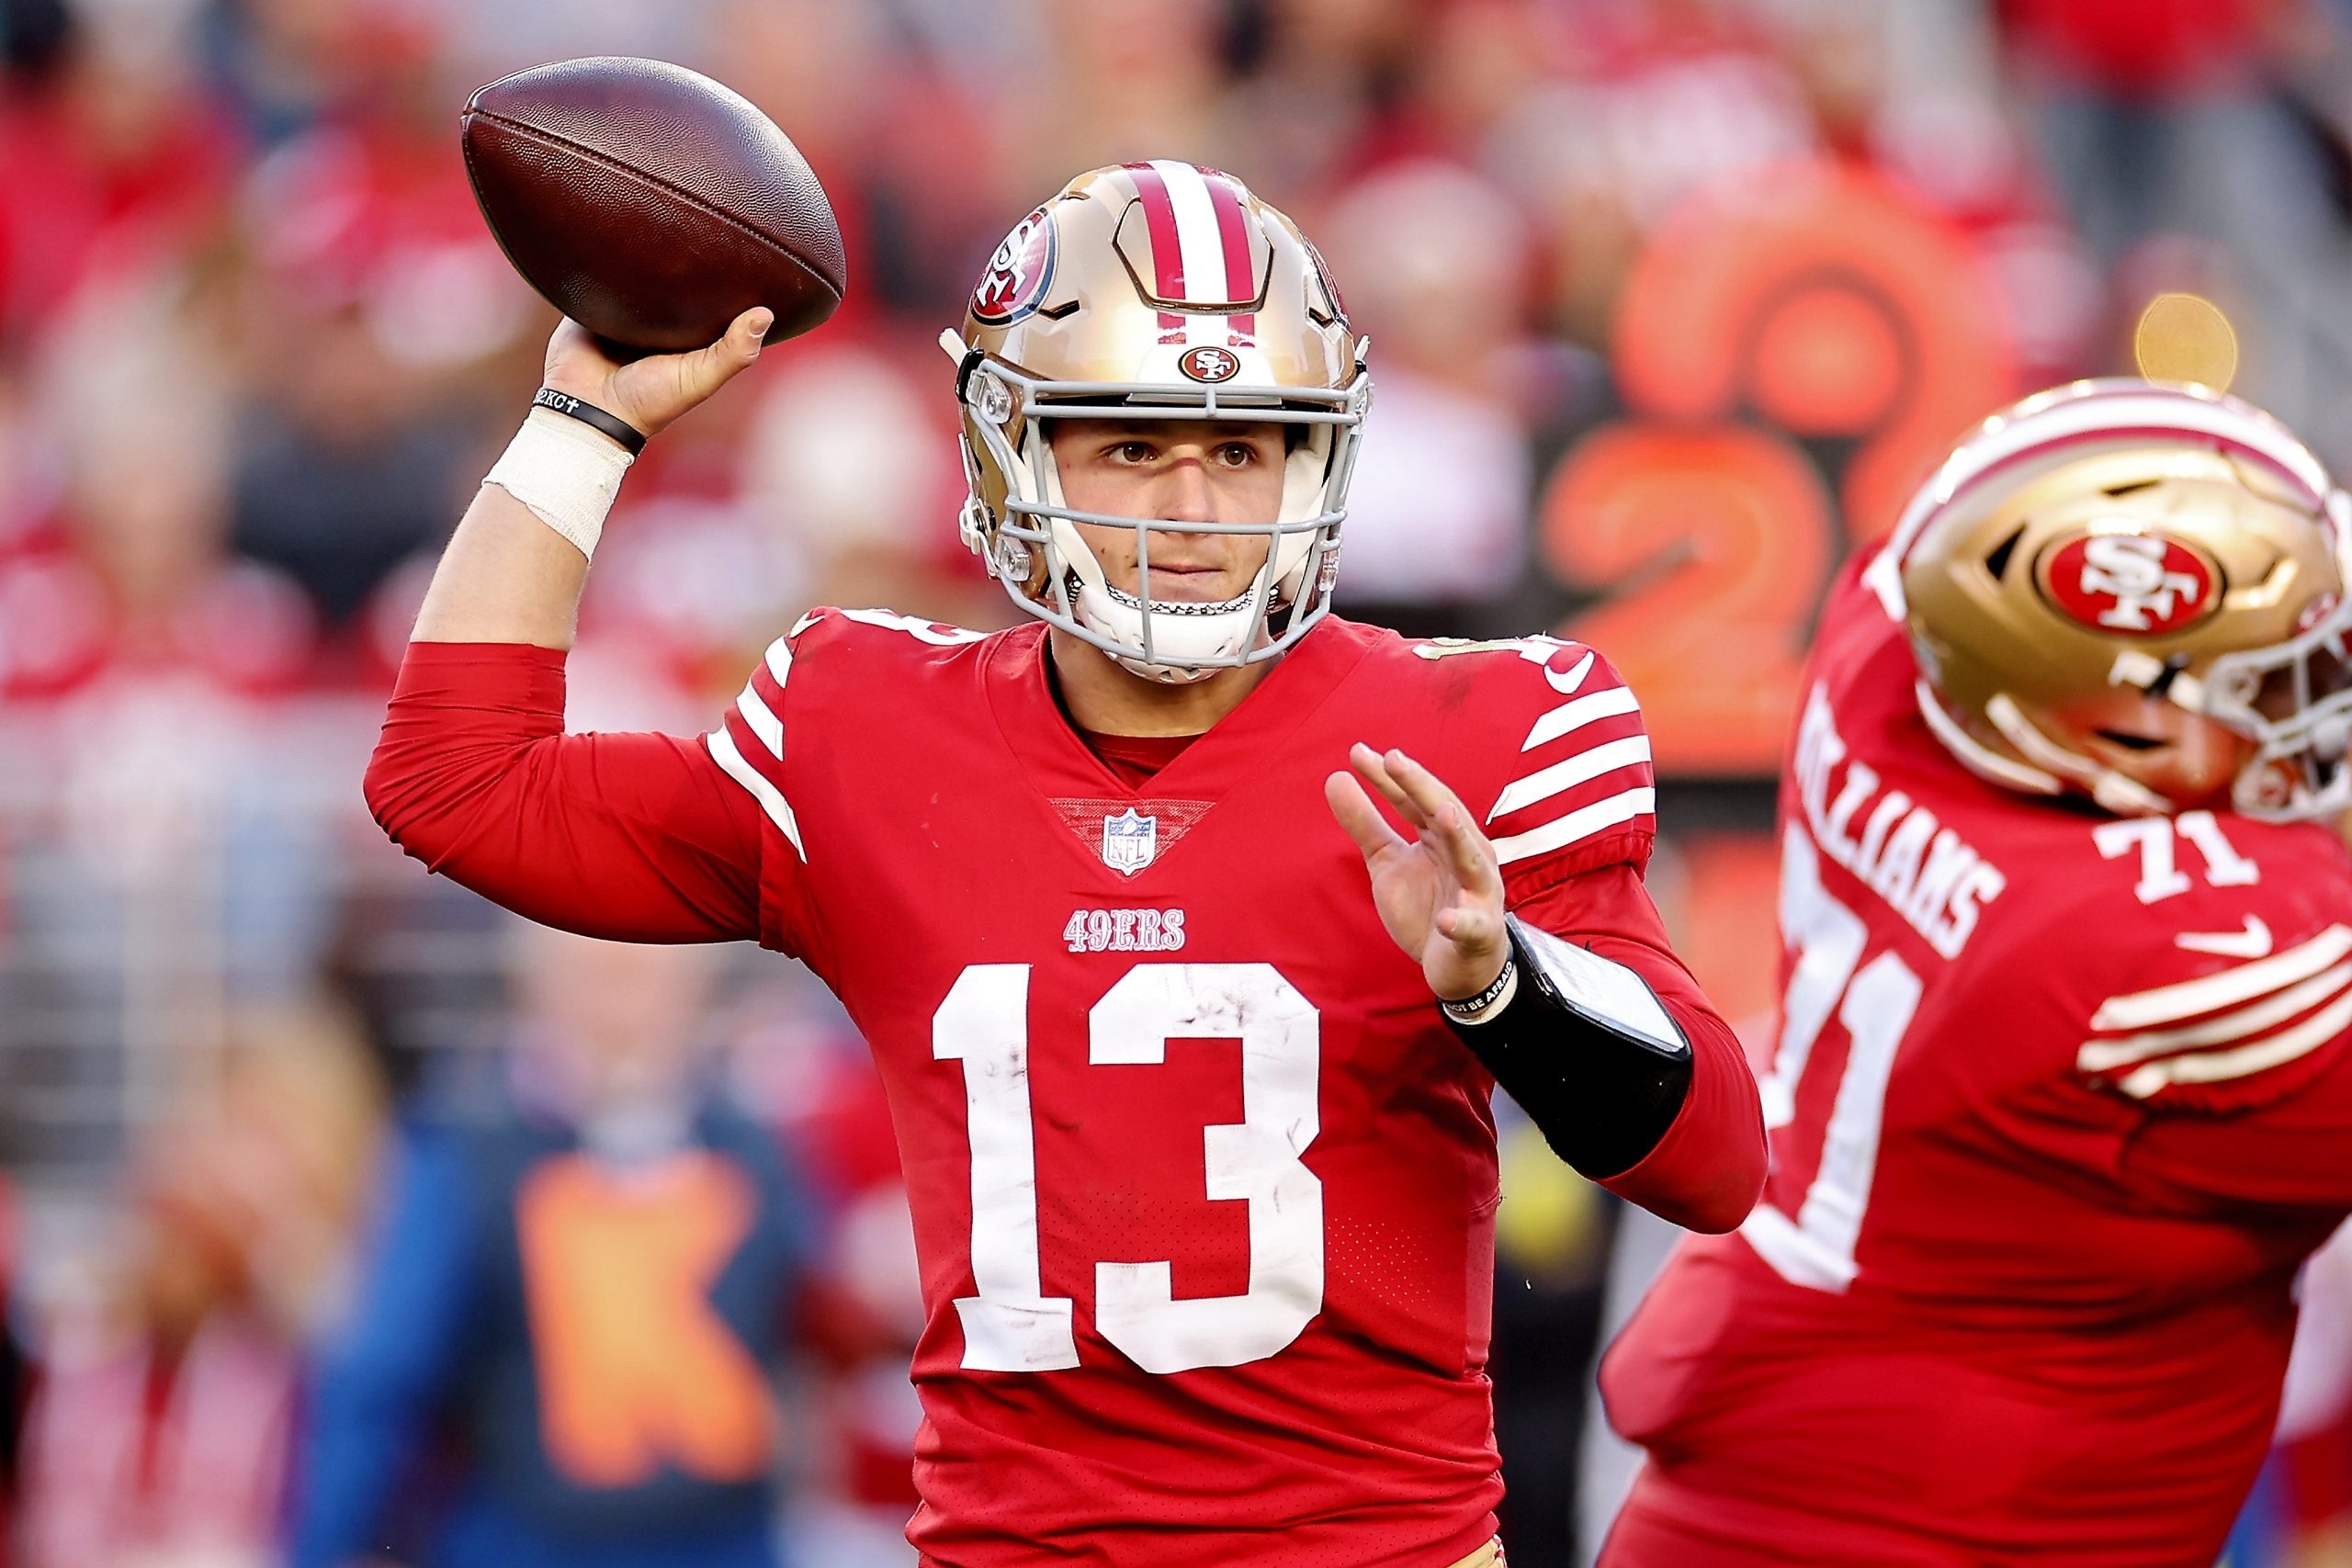 Can Niners contend with a QB who has yet to make his first NFL start?